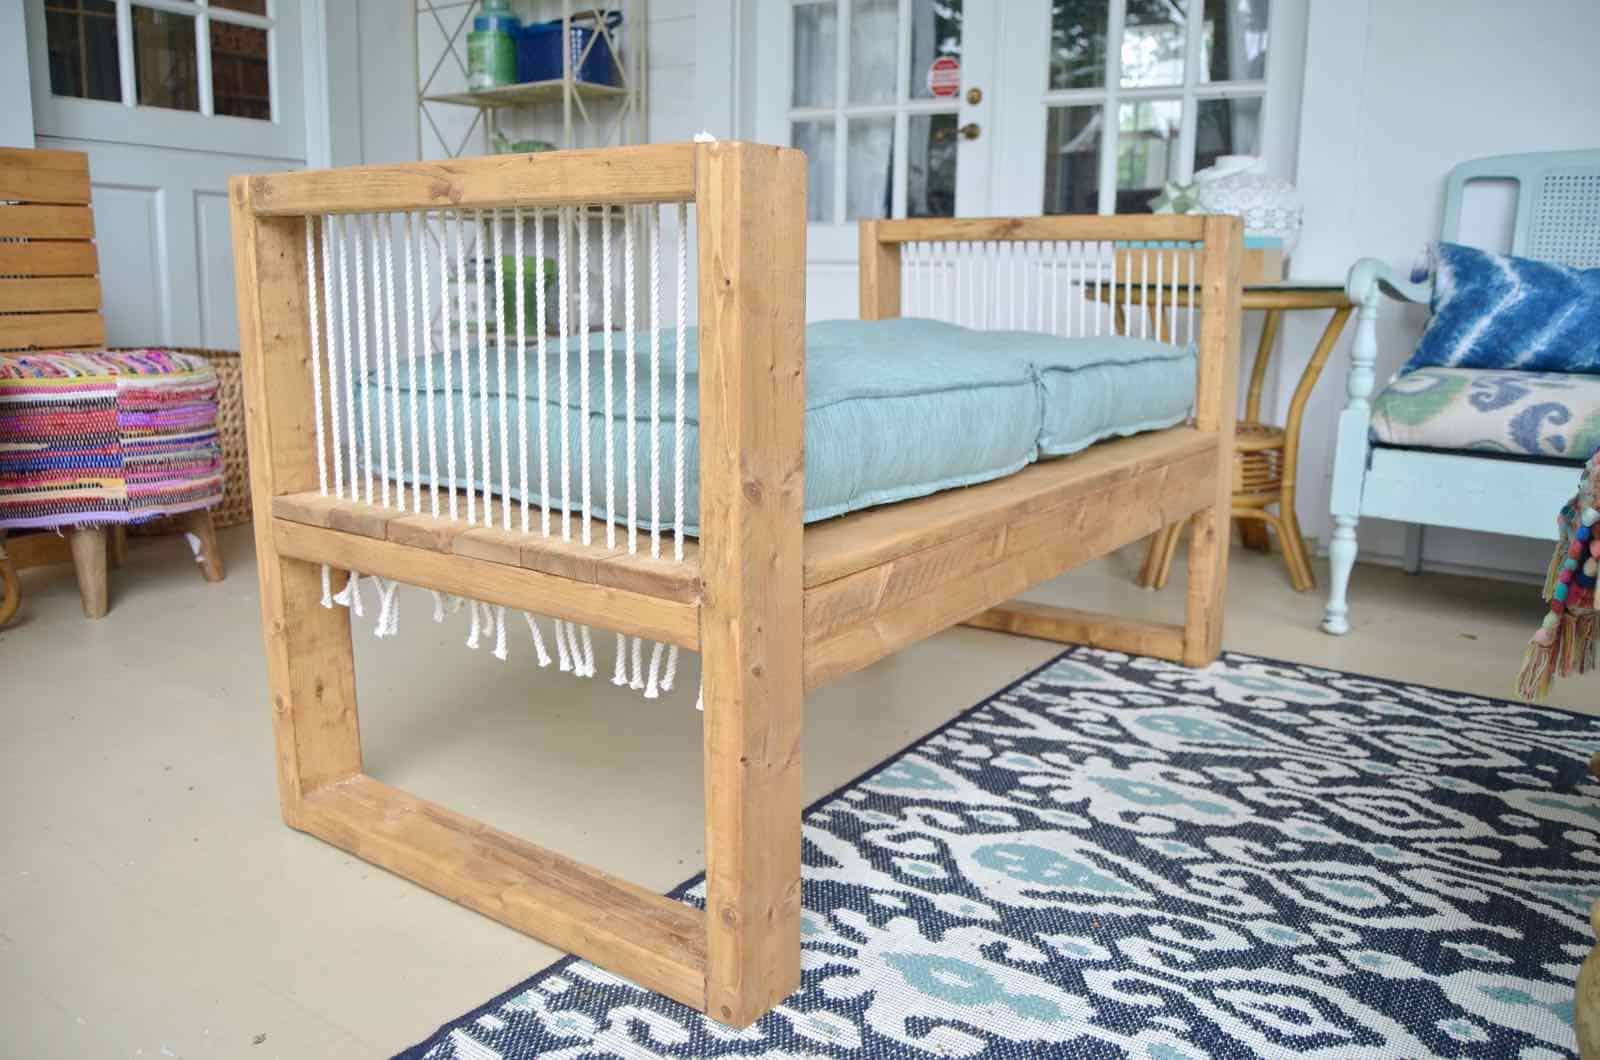 DIY bench made out of 2x4s with chic rope detail